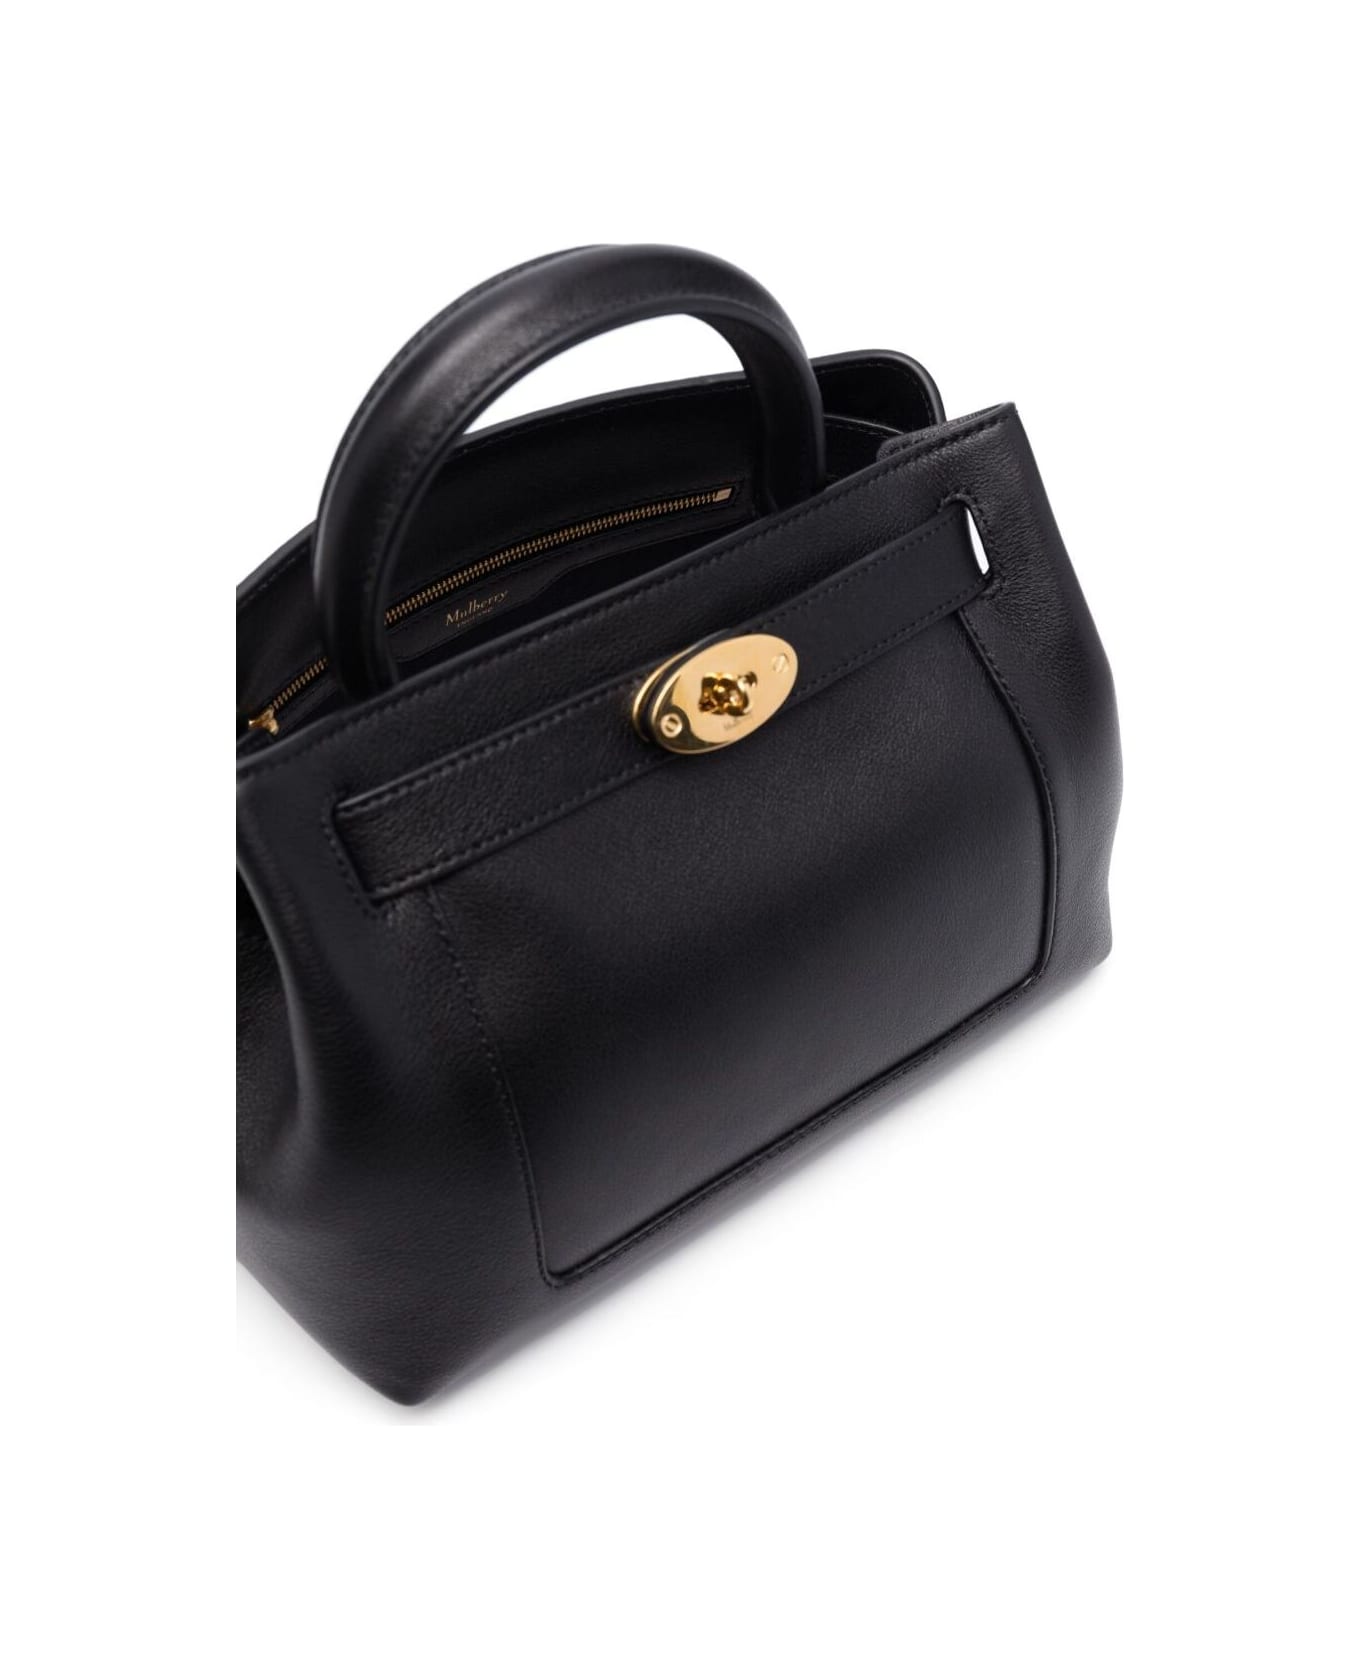 Mulberry Black Hand Bag With Single Handle And Gold-tone Details In Leather Woman - Black